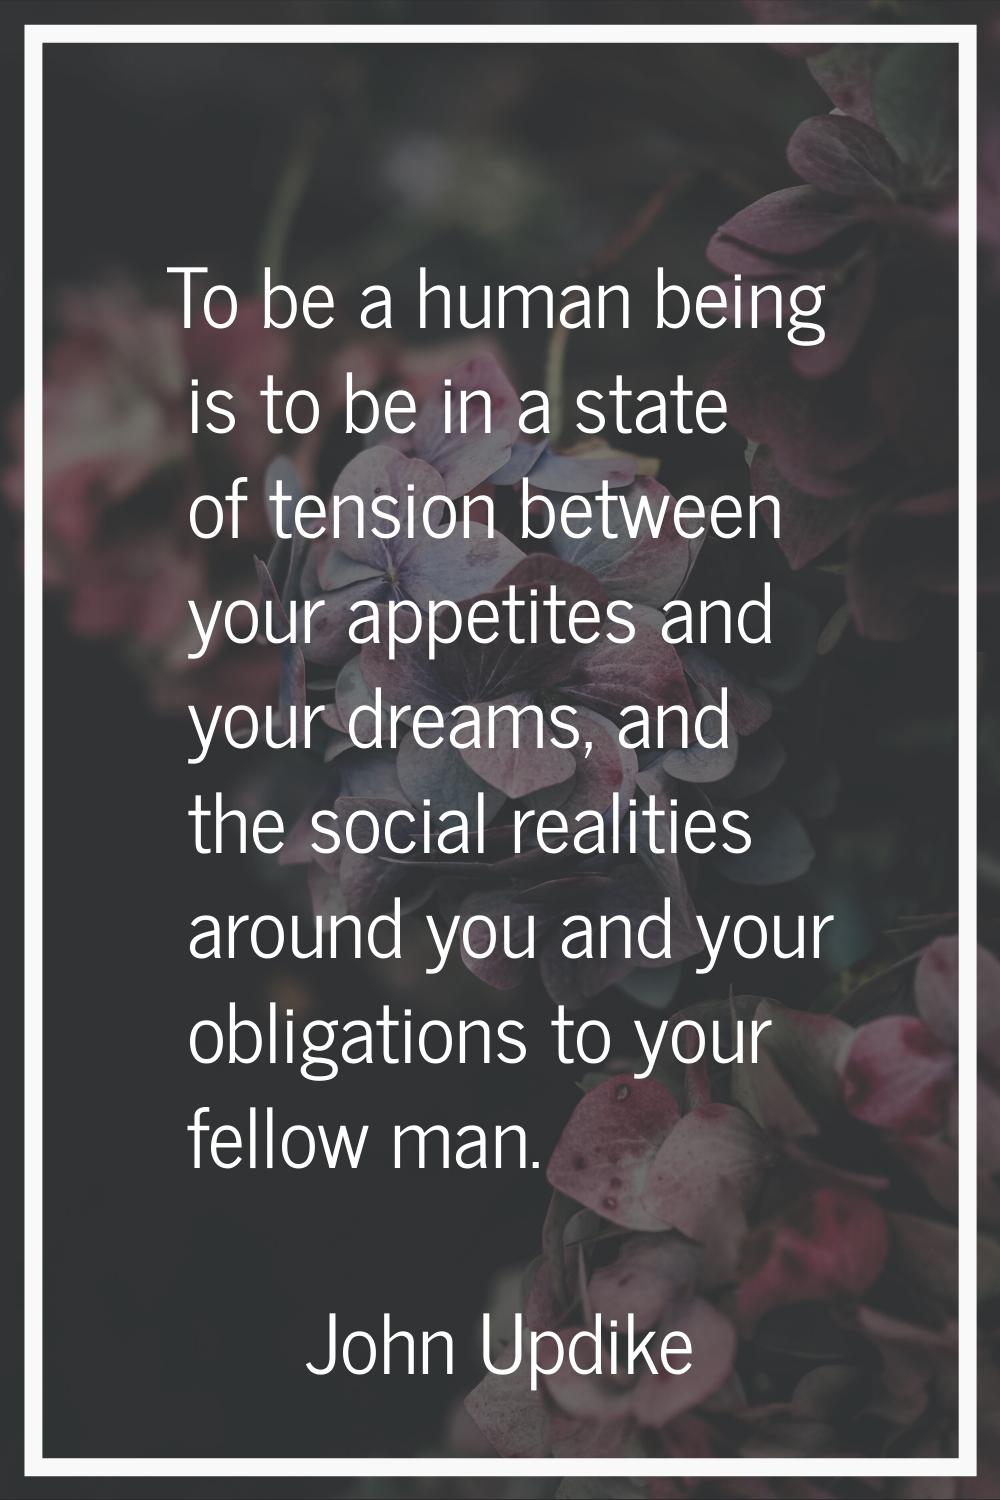 To be a human being is to be in a state of tension between your appetites and your dreams, and the 